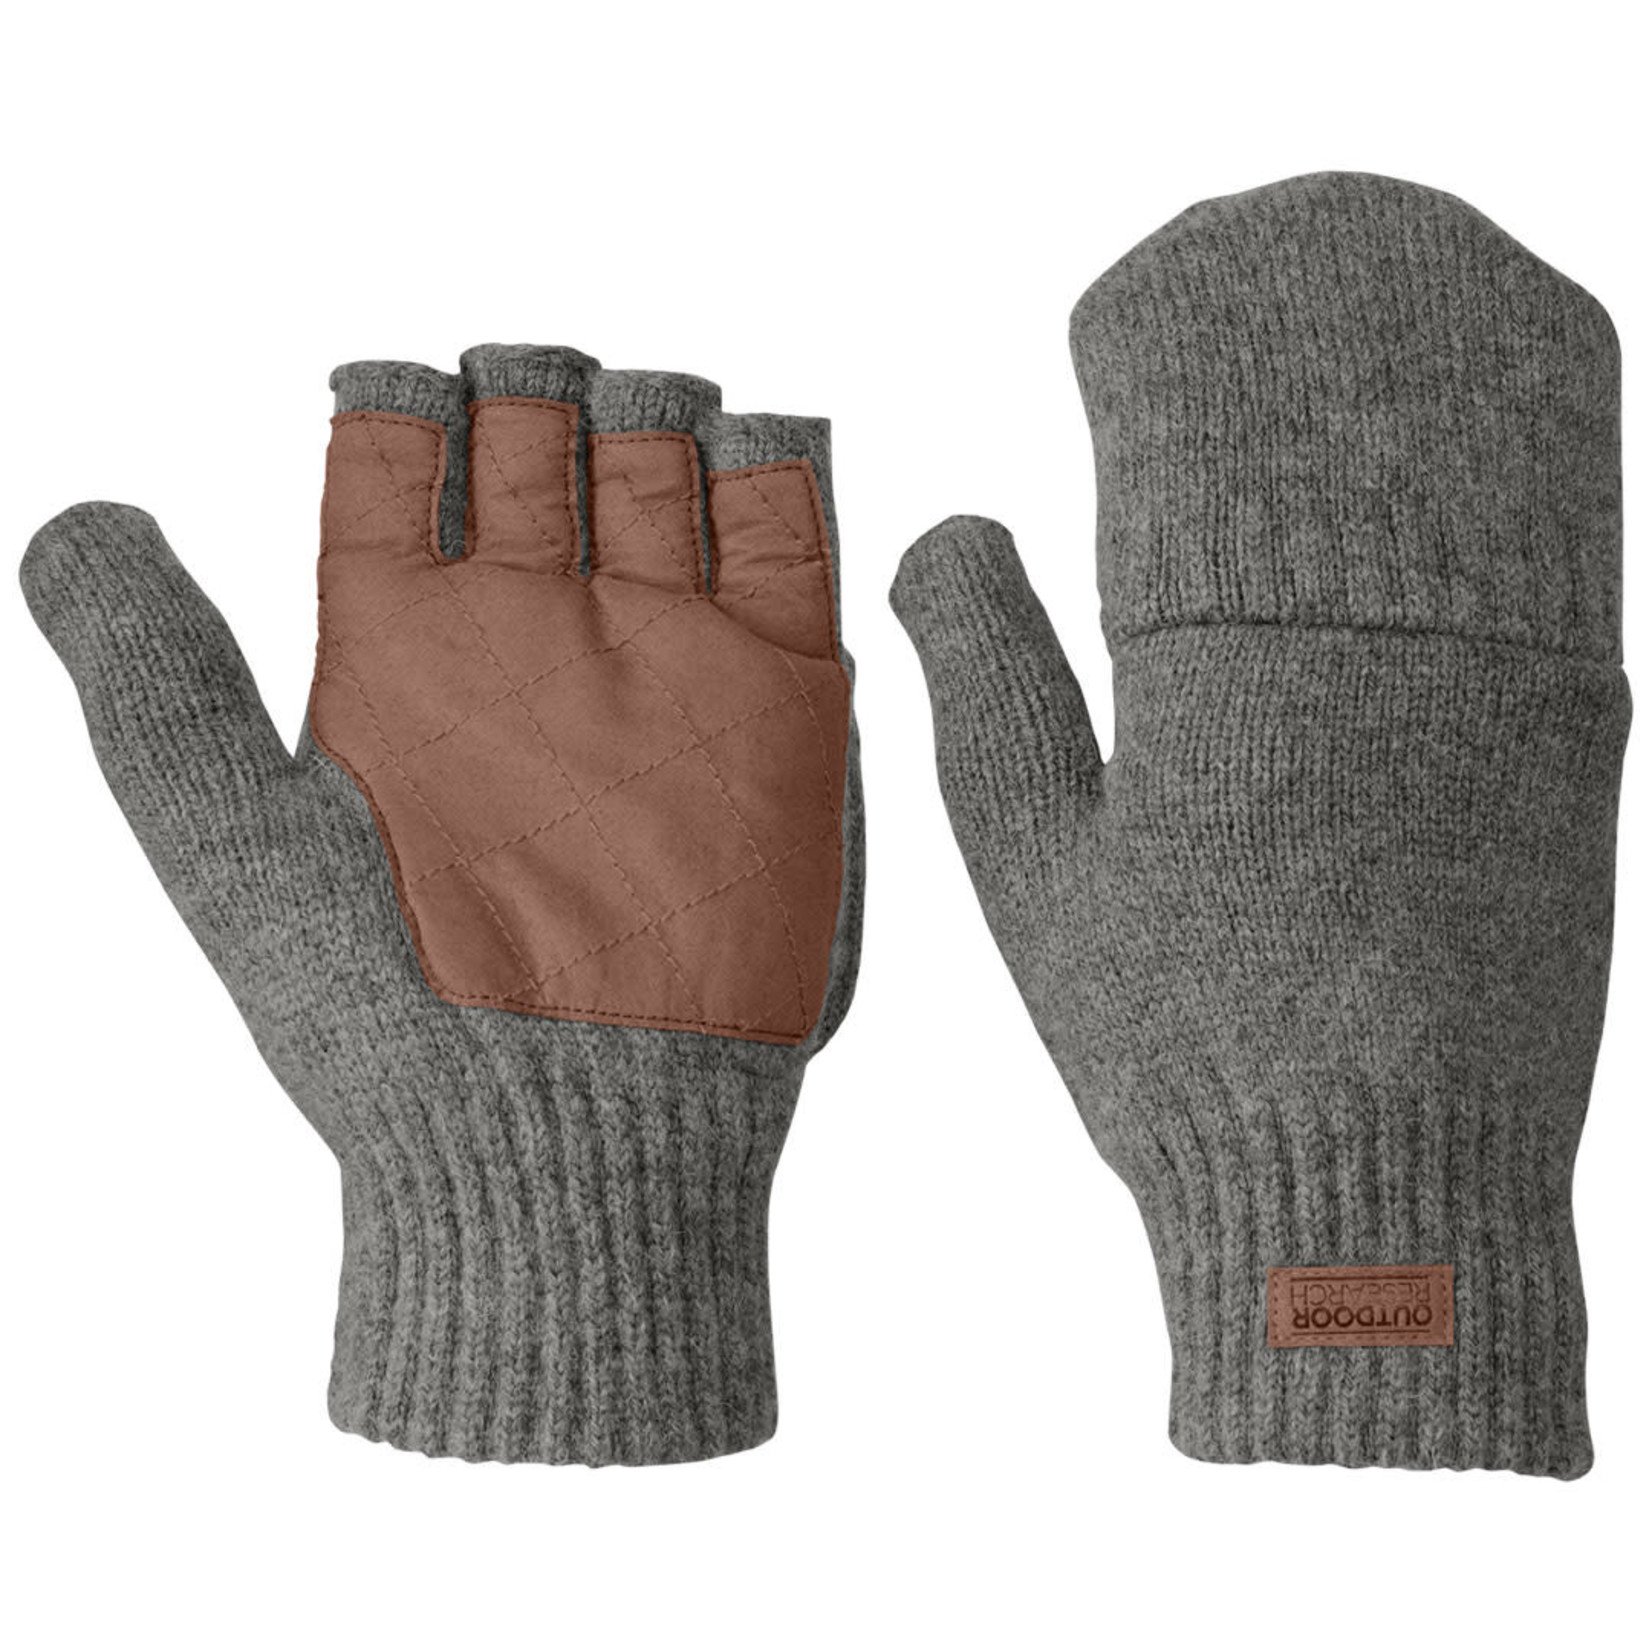 Outdoor Research Lost Coast Fingerless Mitts M's